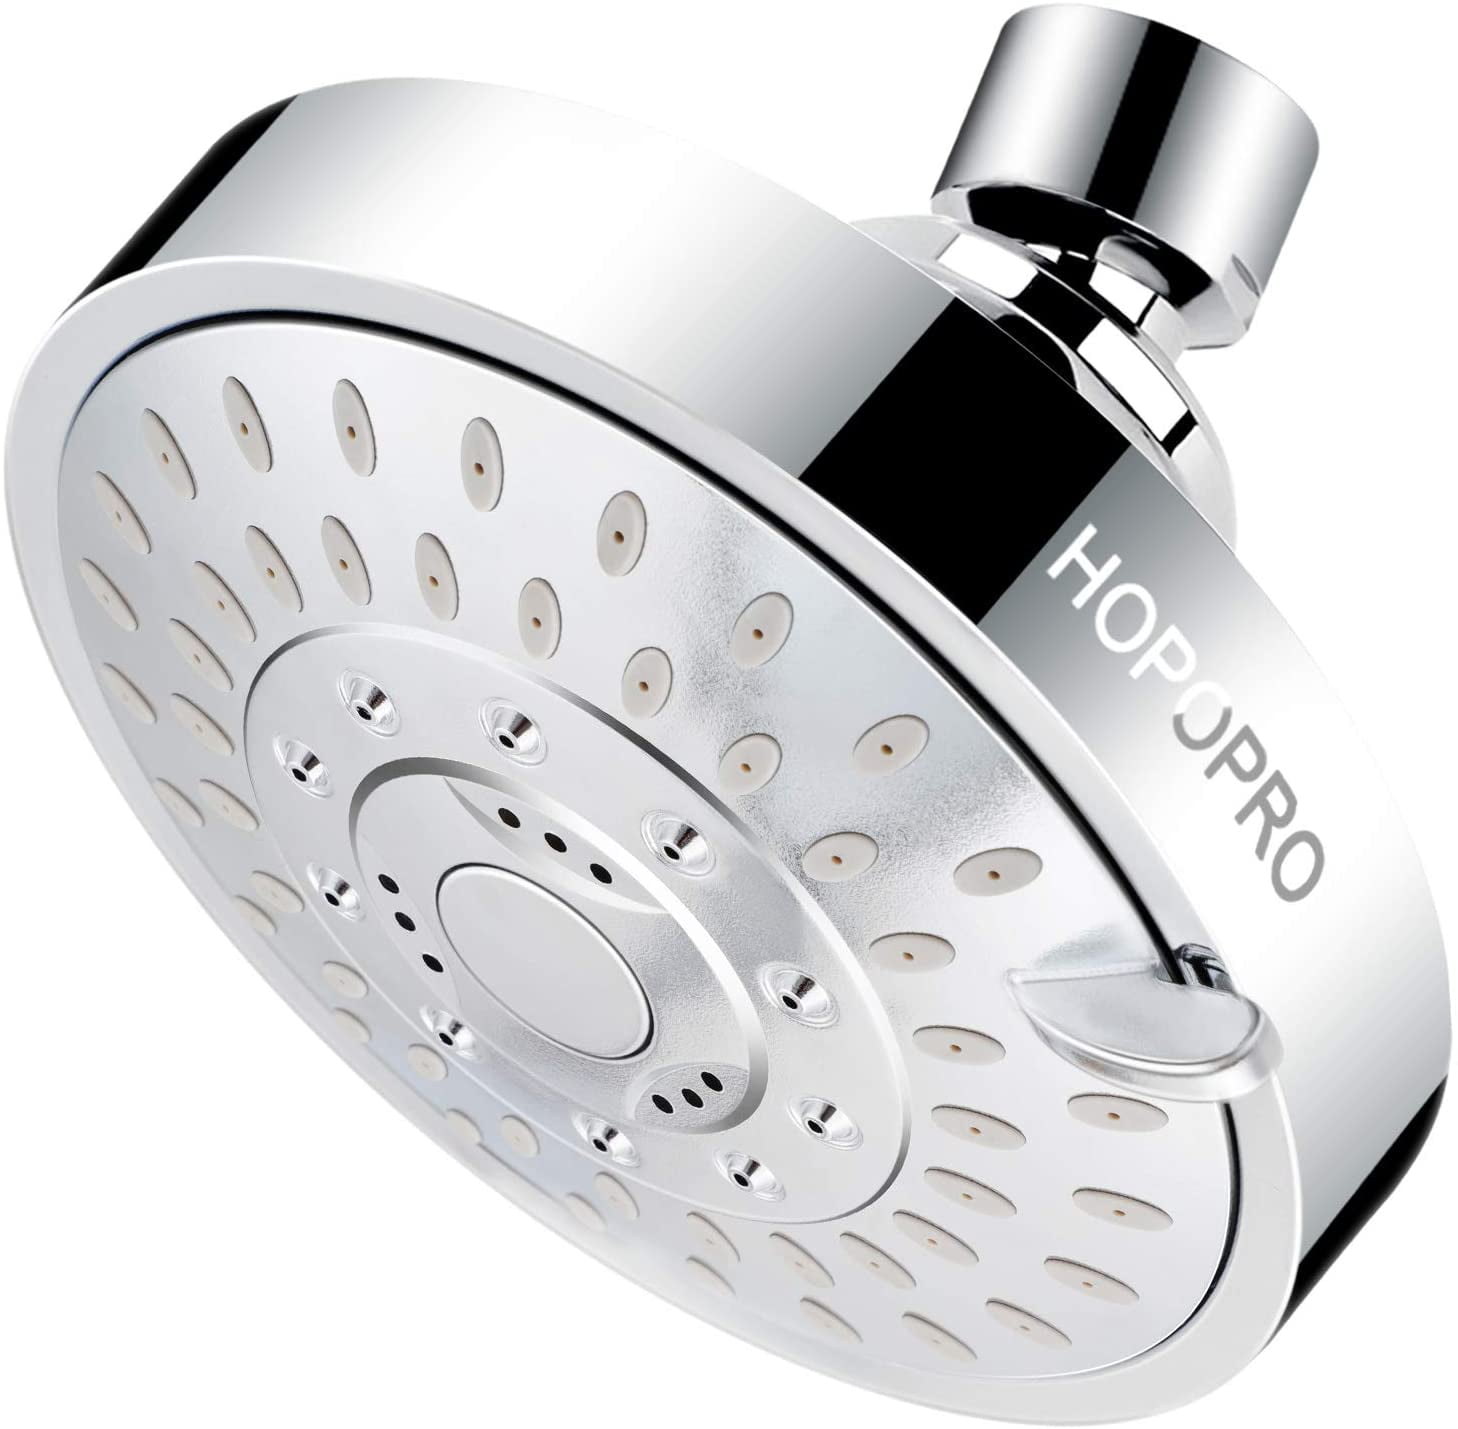 4 Inch High Flow/Pressure Fixed Shower Head 5-Setting Adjustable for Bathroom 